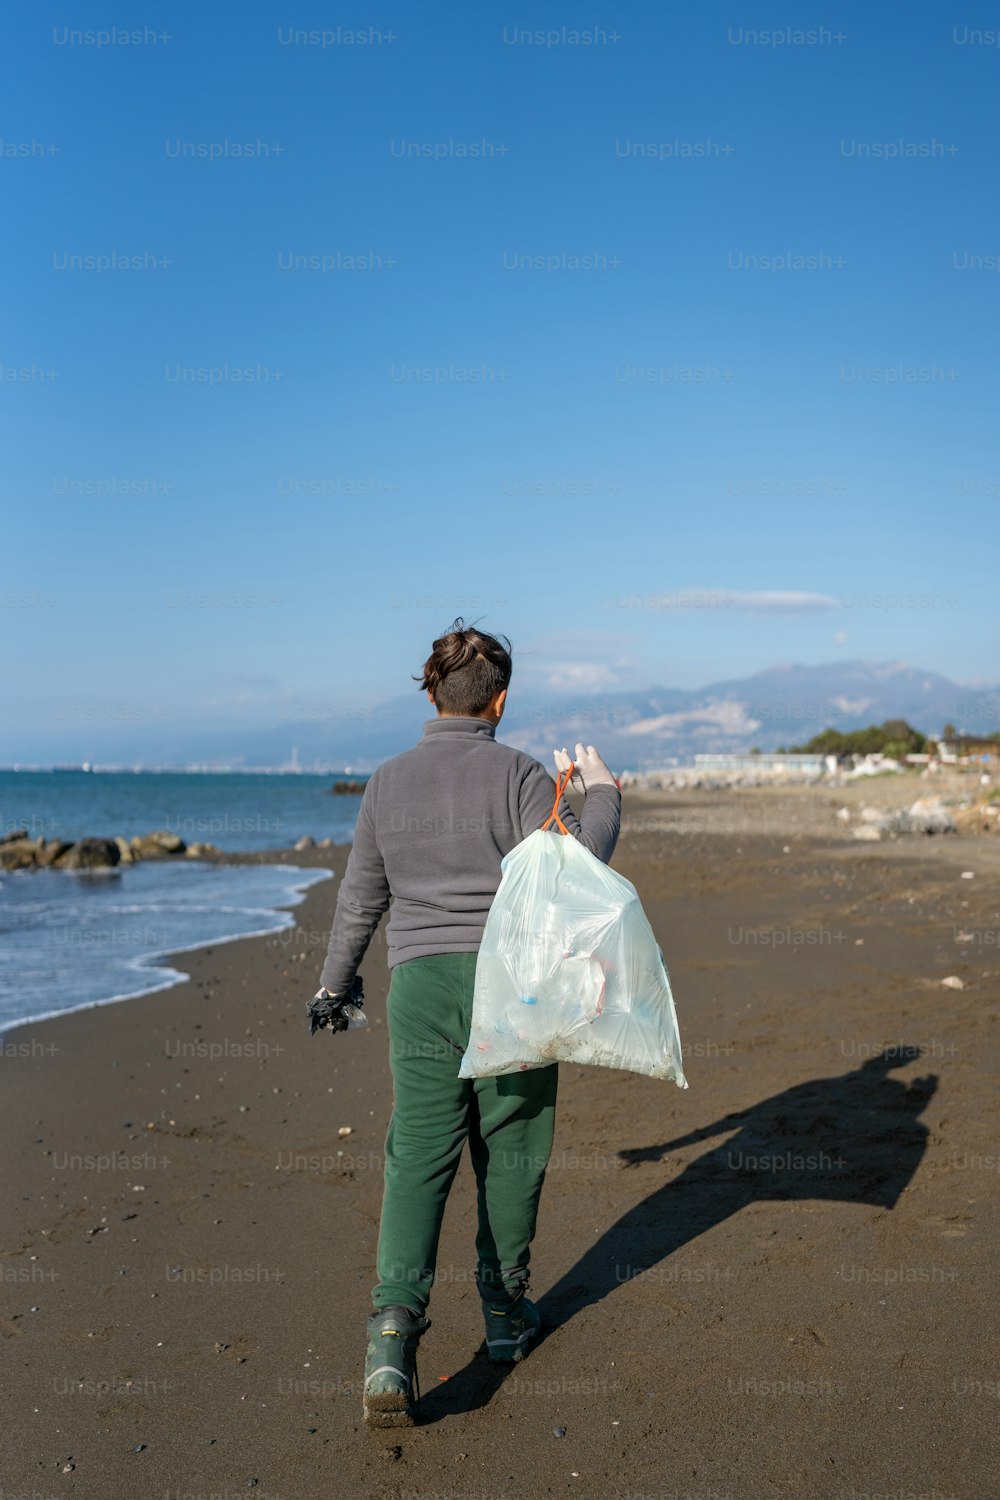 a person walking on a beach with a plastic bag